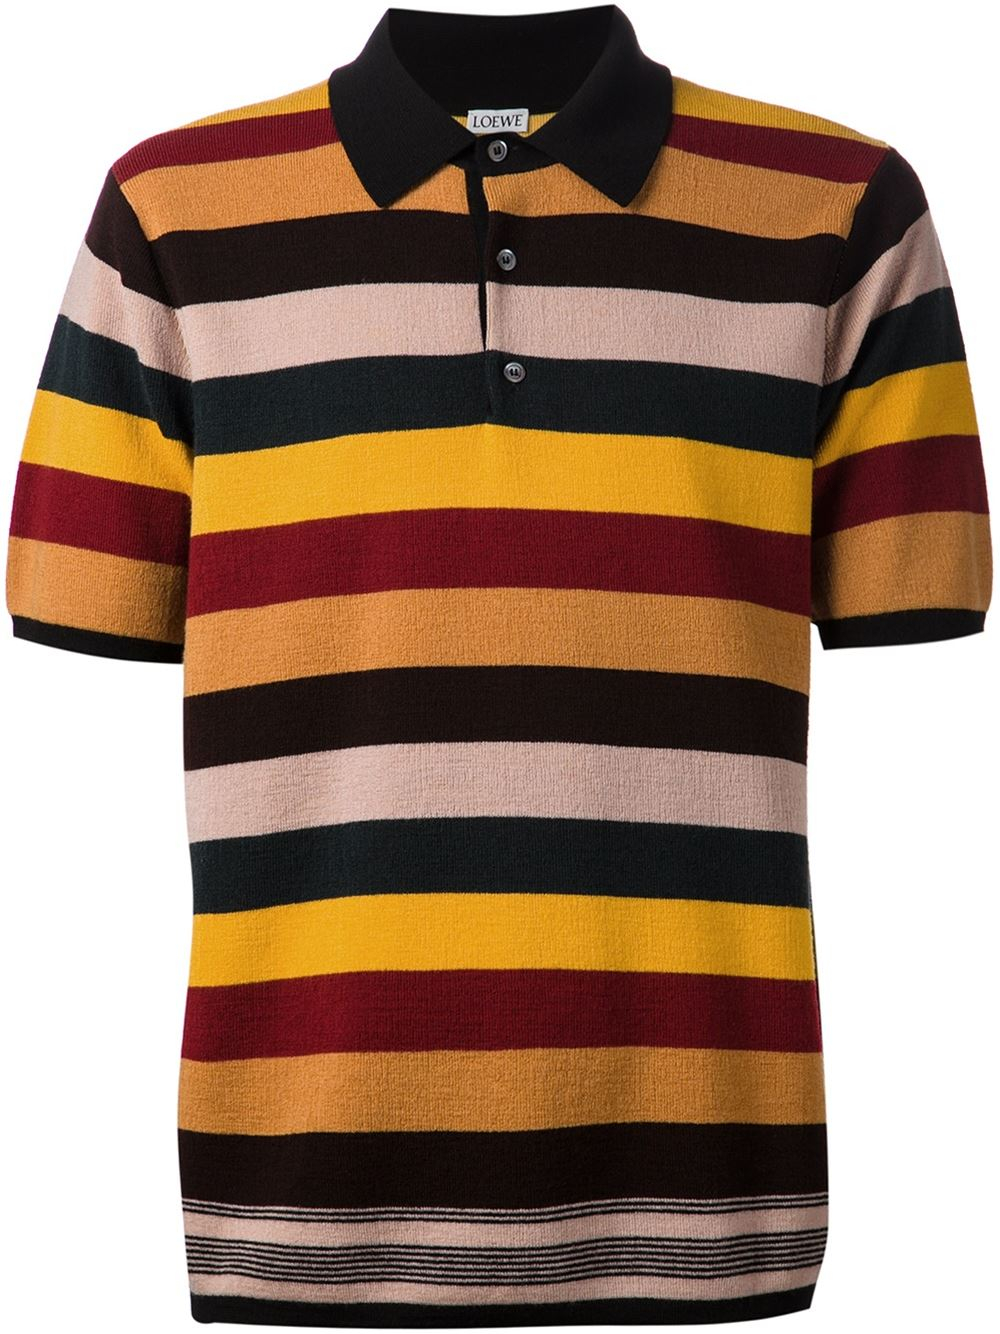 Lyst - Loewe Striped Polo Shirt for Men